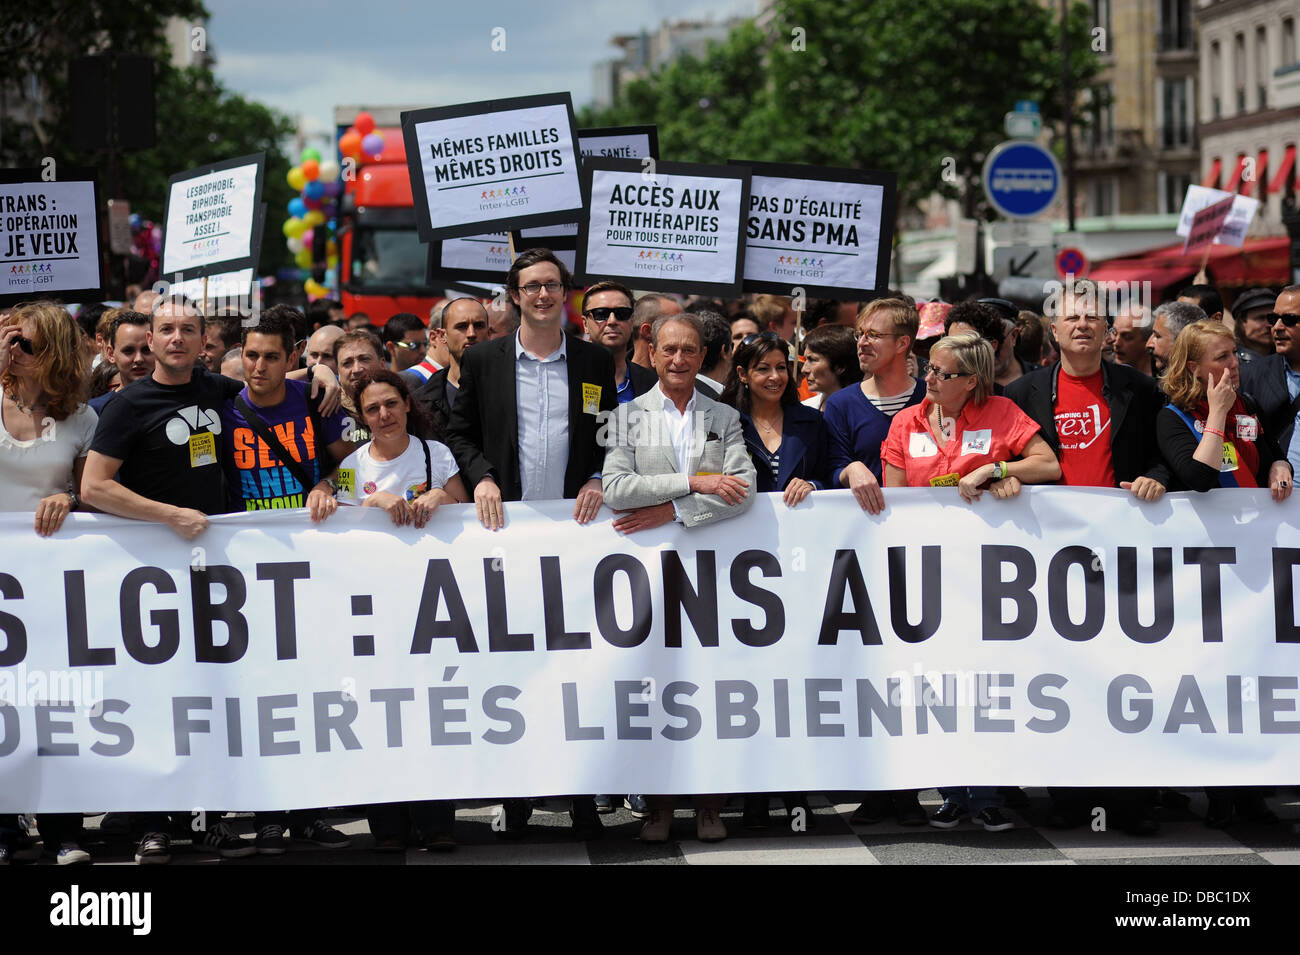 Paris mayor Bertrand Delanoe joins gay rights activists taking part in the Pride Parade in Paris, France. Stock Photo